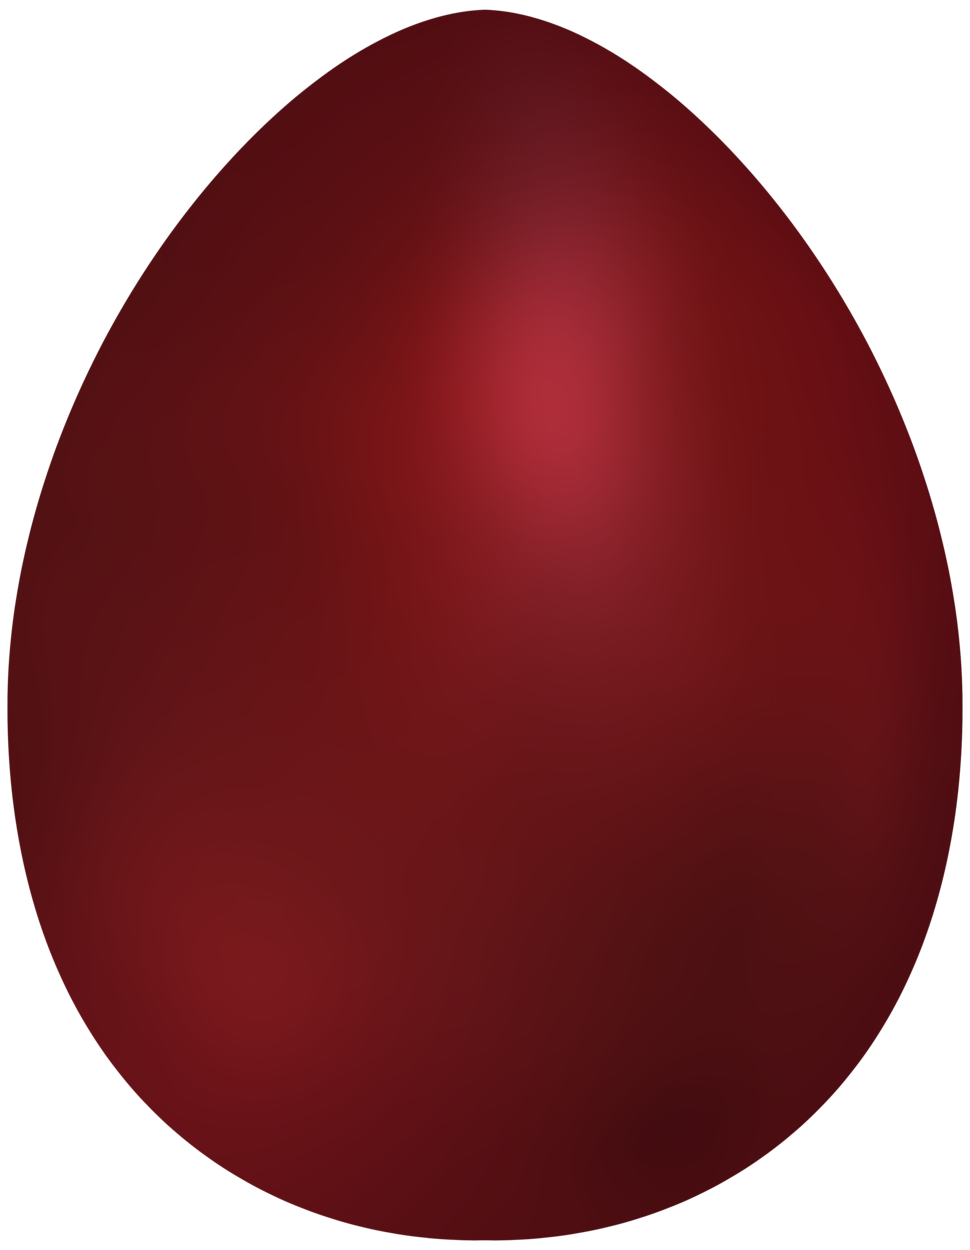 Oval at getdrawings com. Egg clipart egg shape